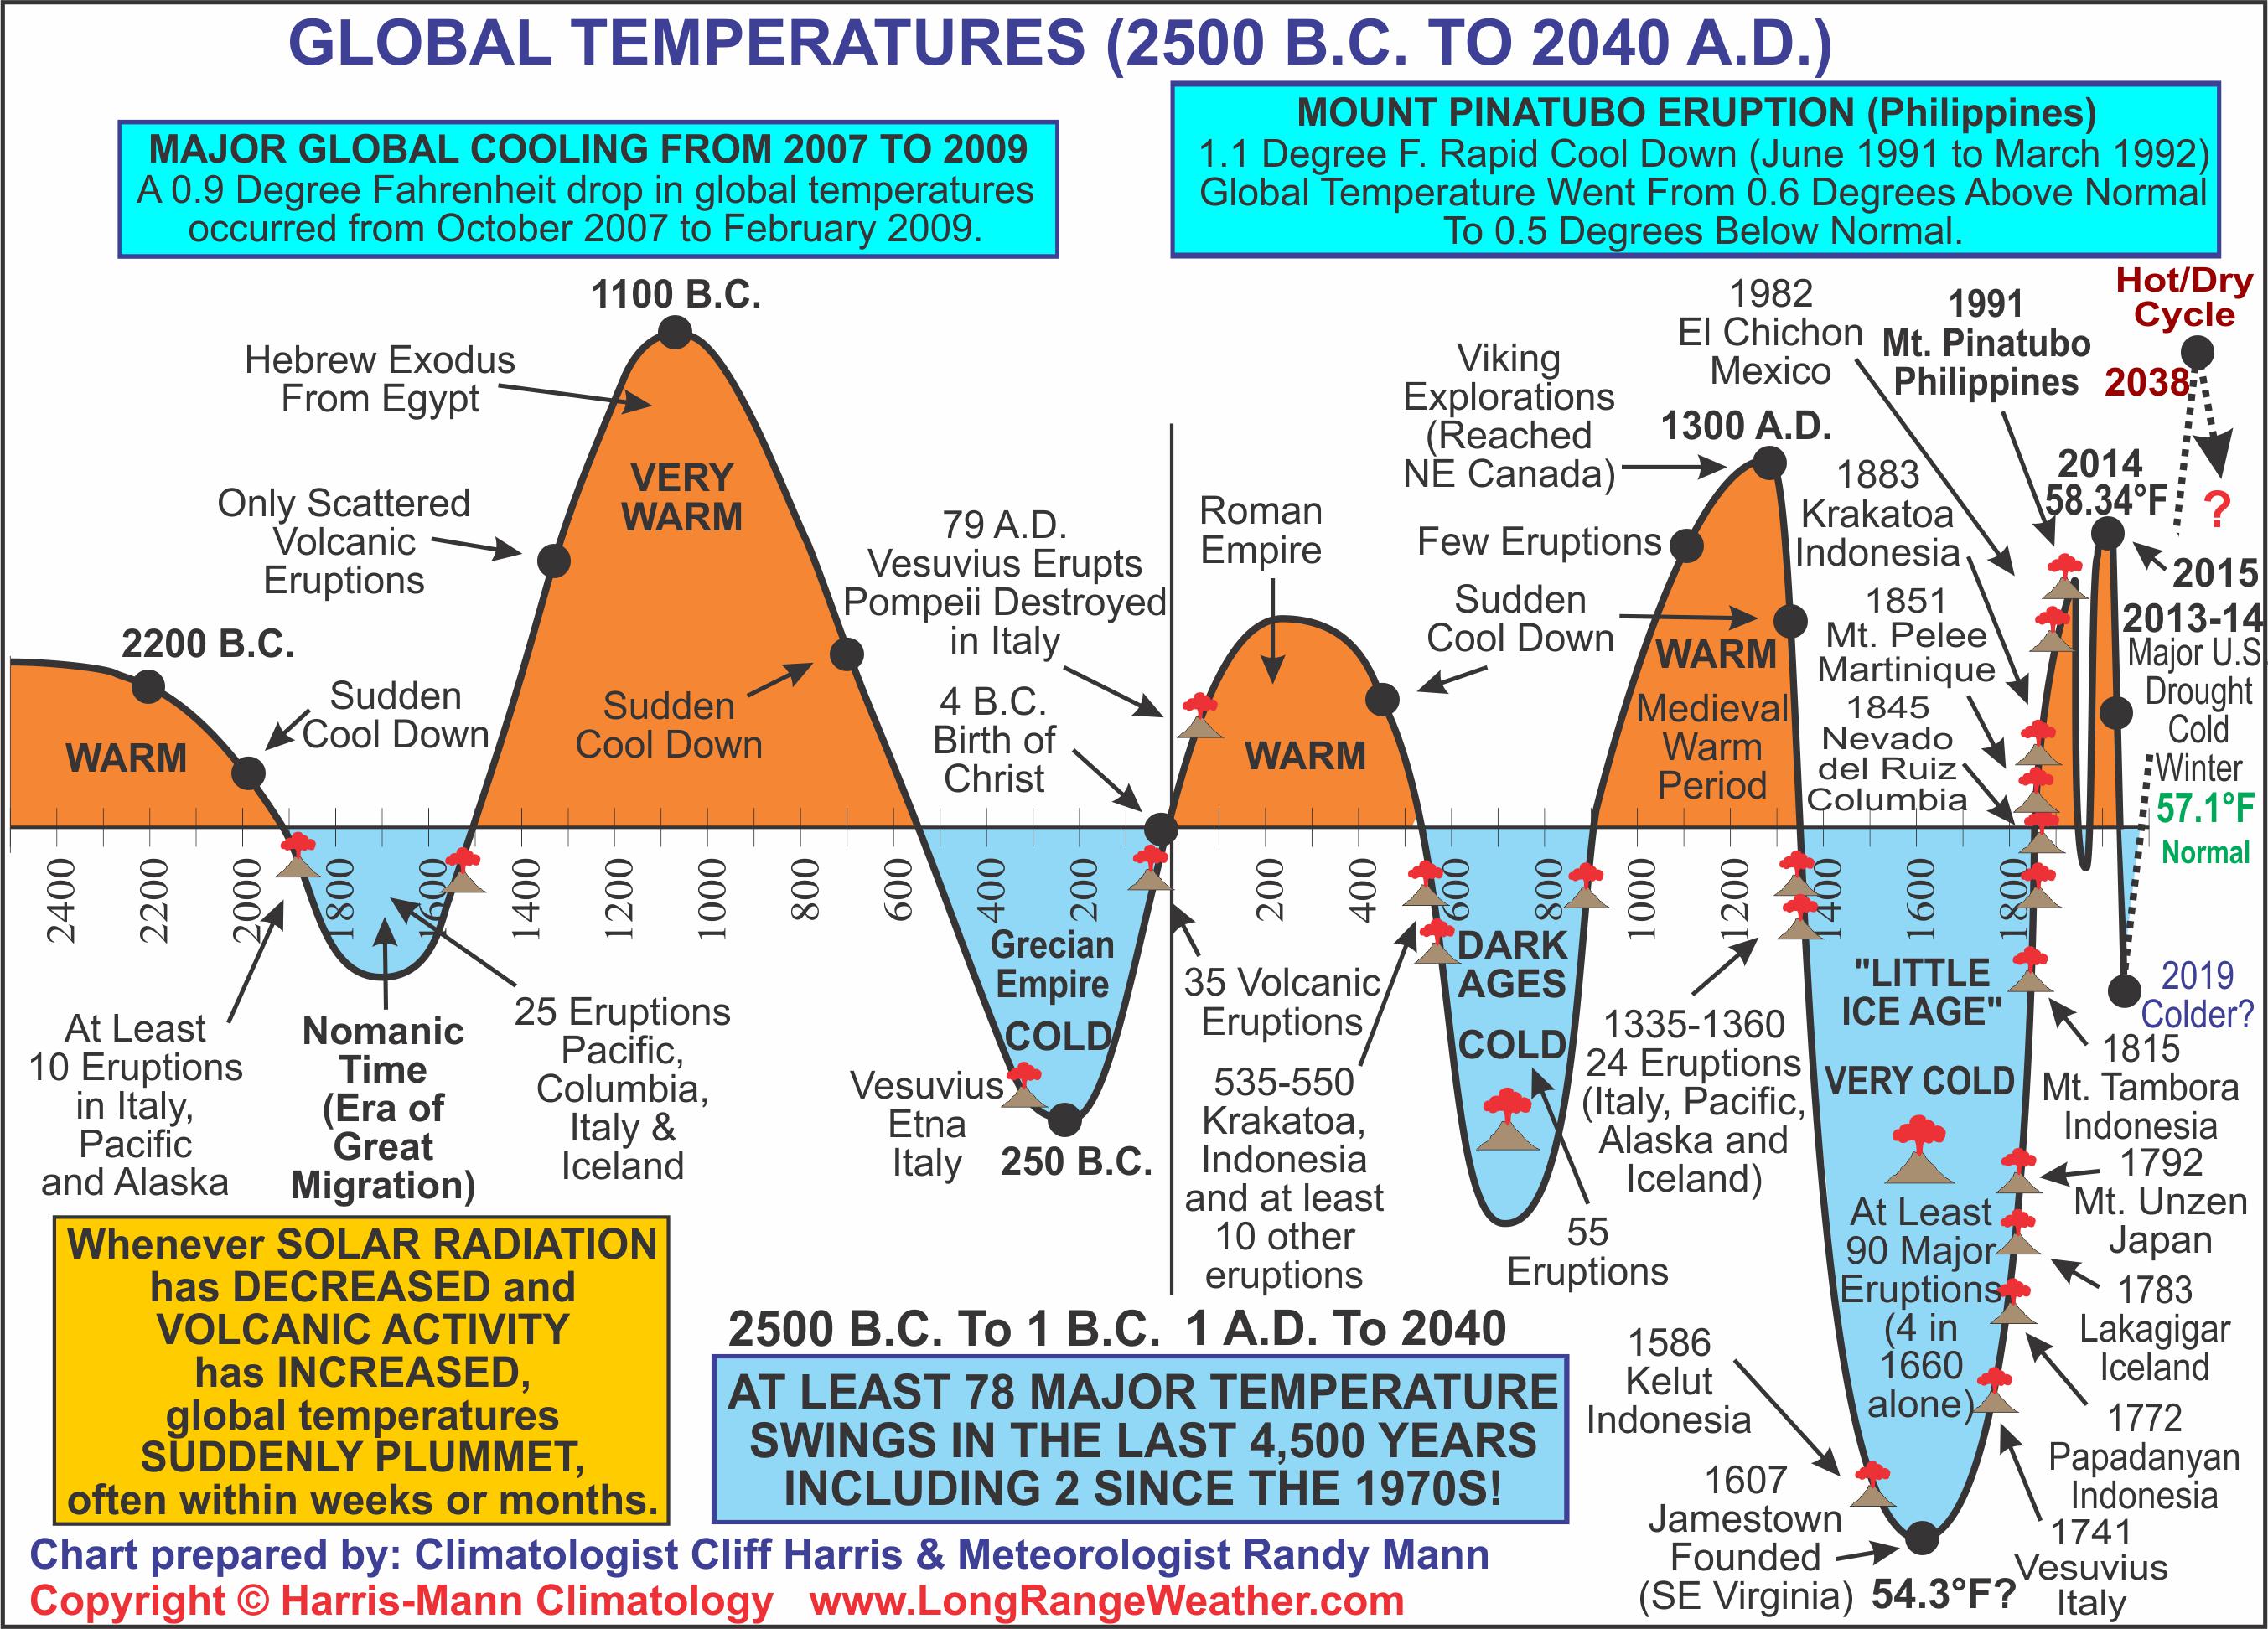 14-global-temps-2500-bc-to-2040.jpg